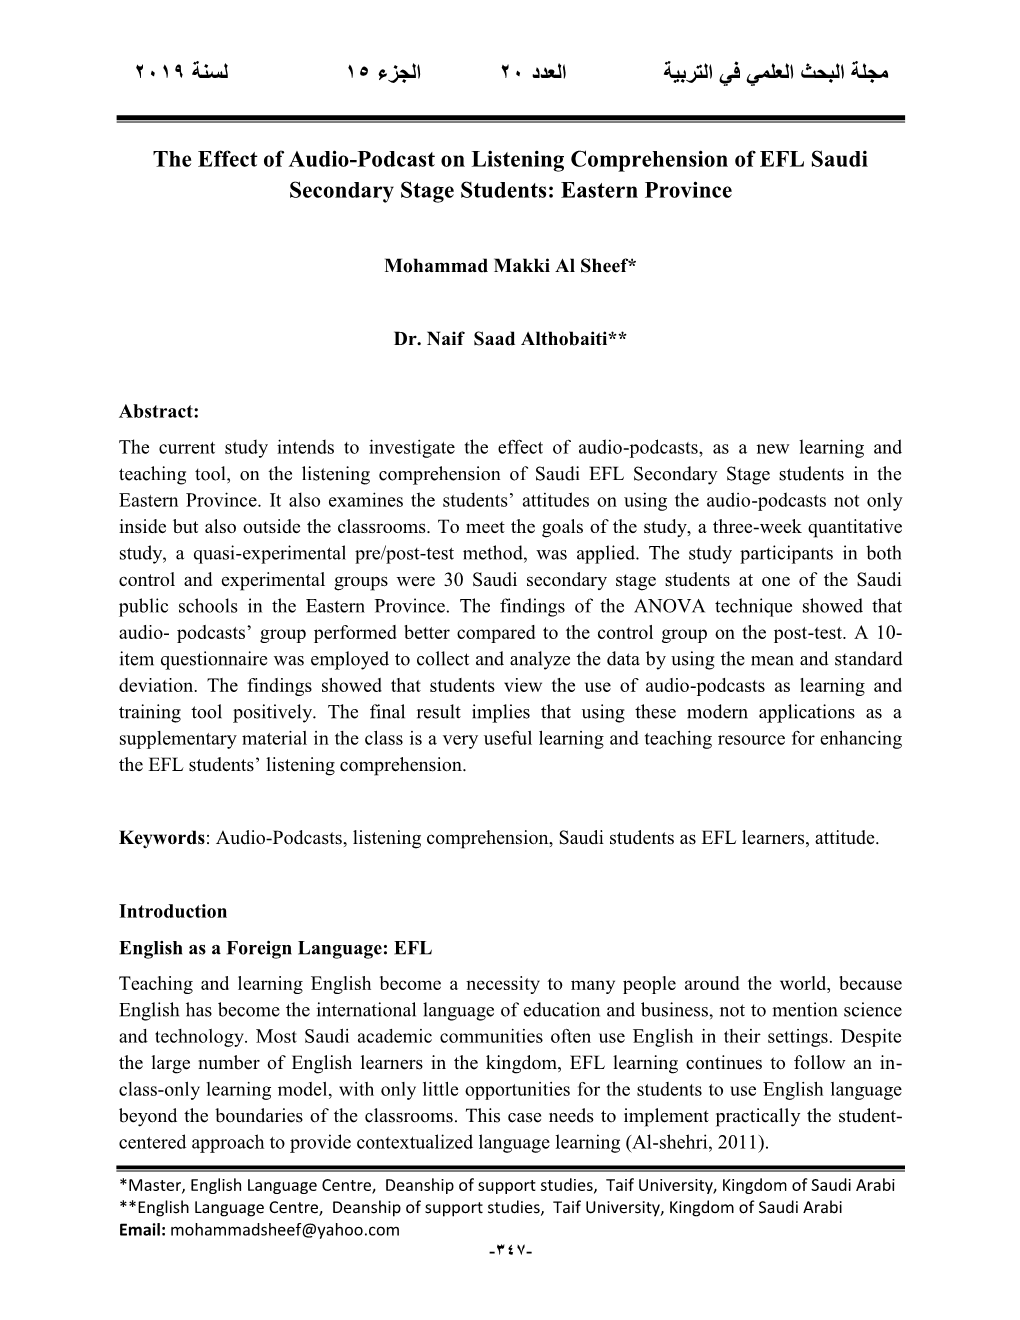 The Effect of Audio-Podcast on Listening Comprehension of EFL Saudi Secondary Stage Students: Eastern Province